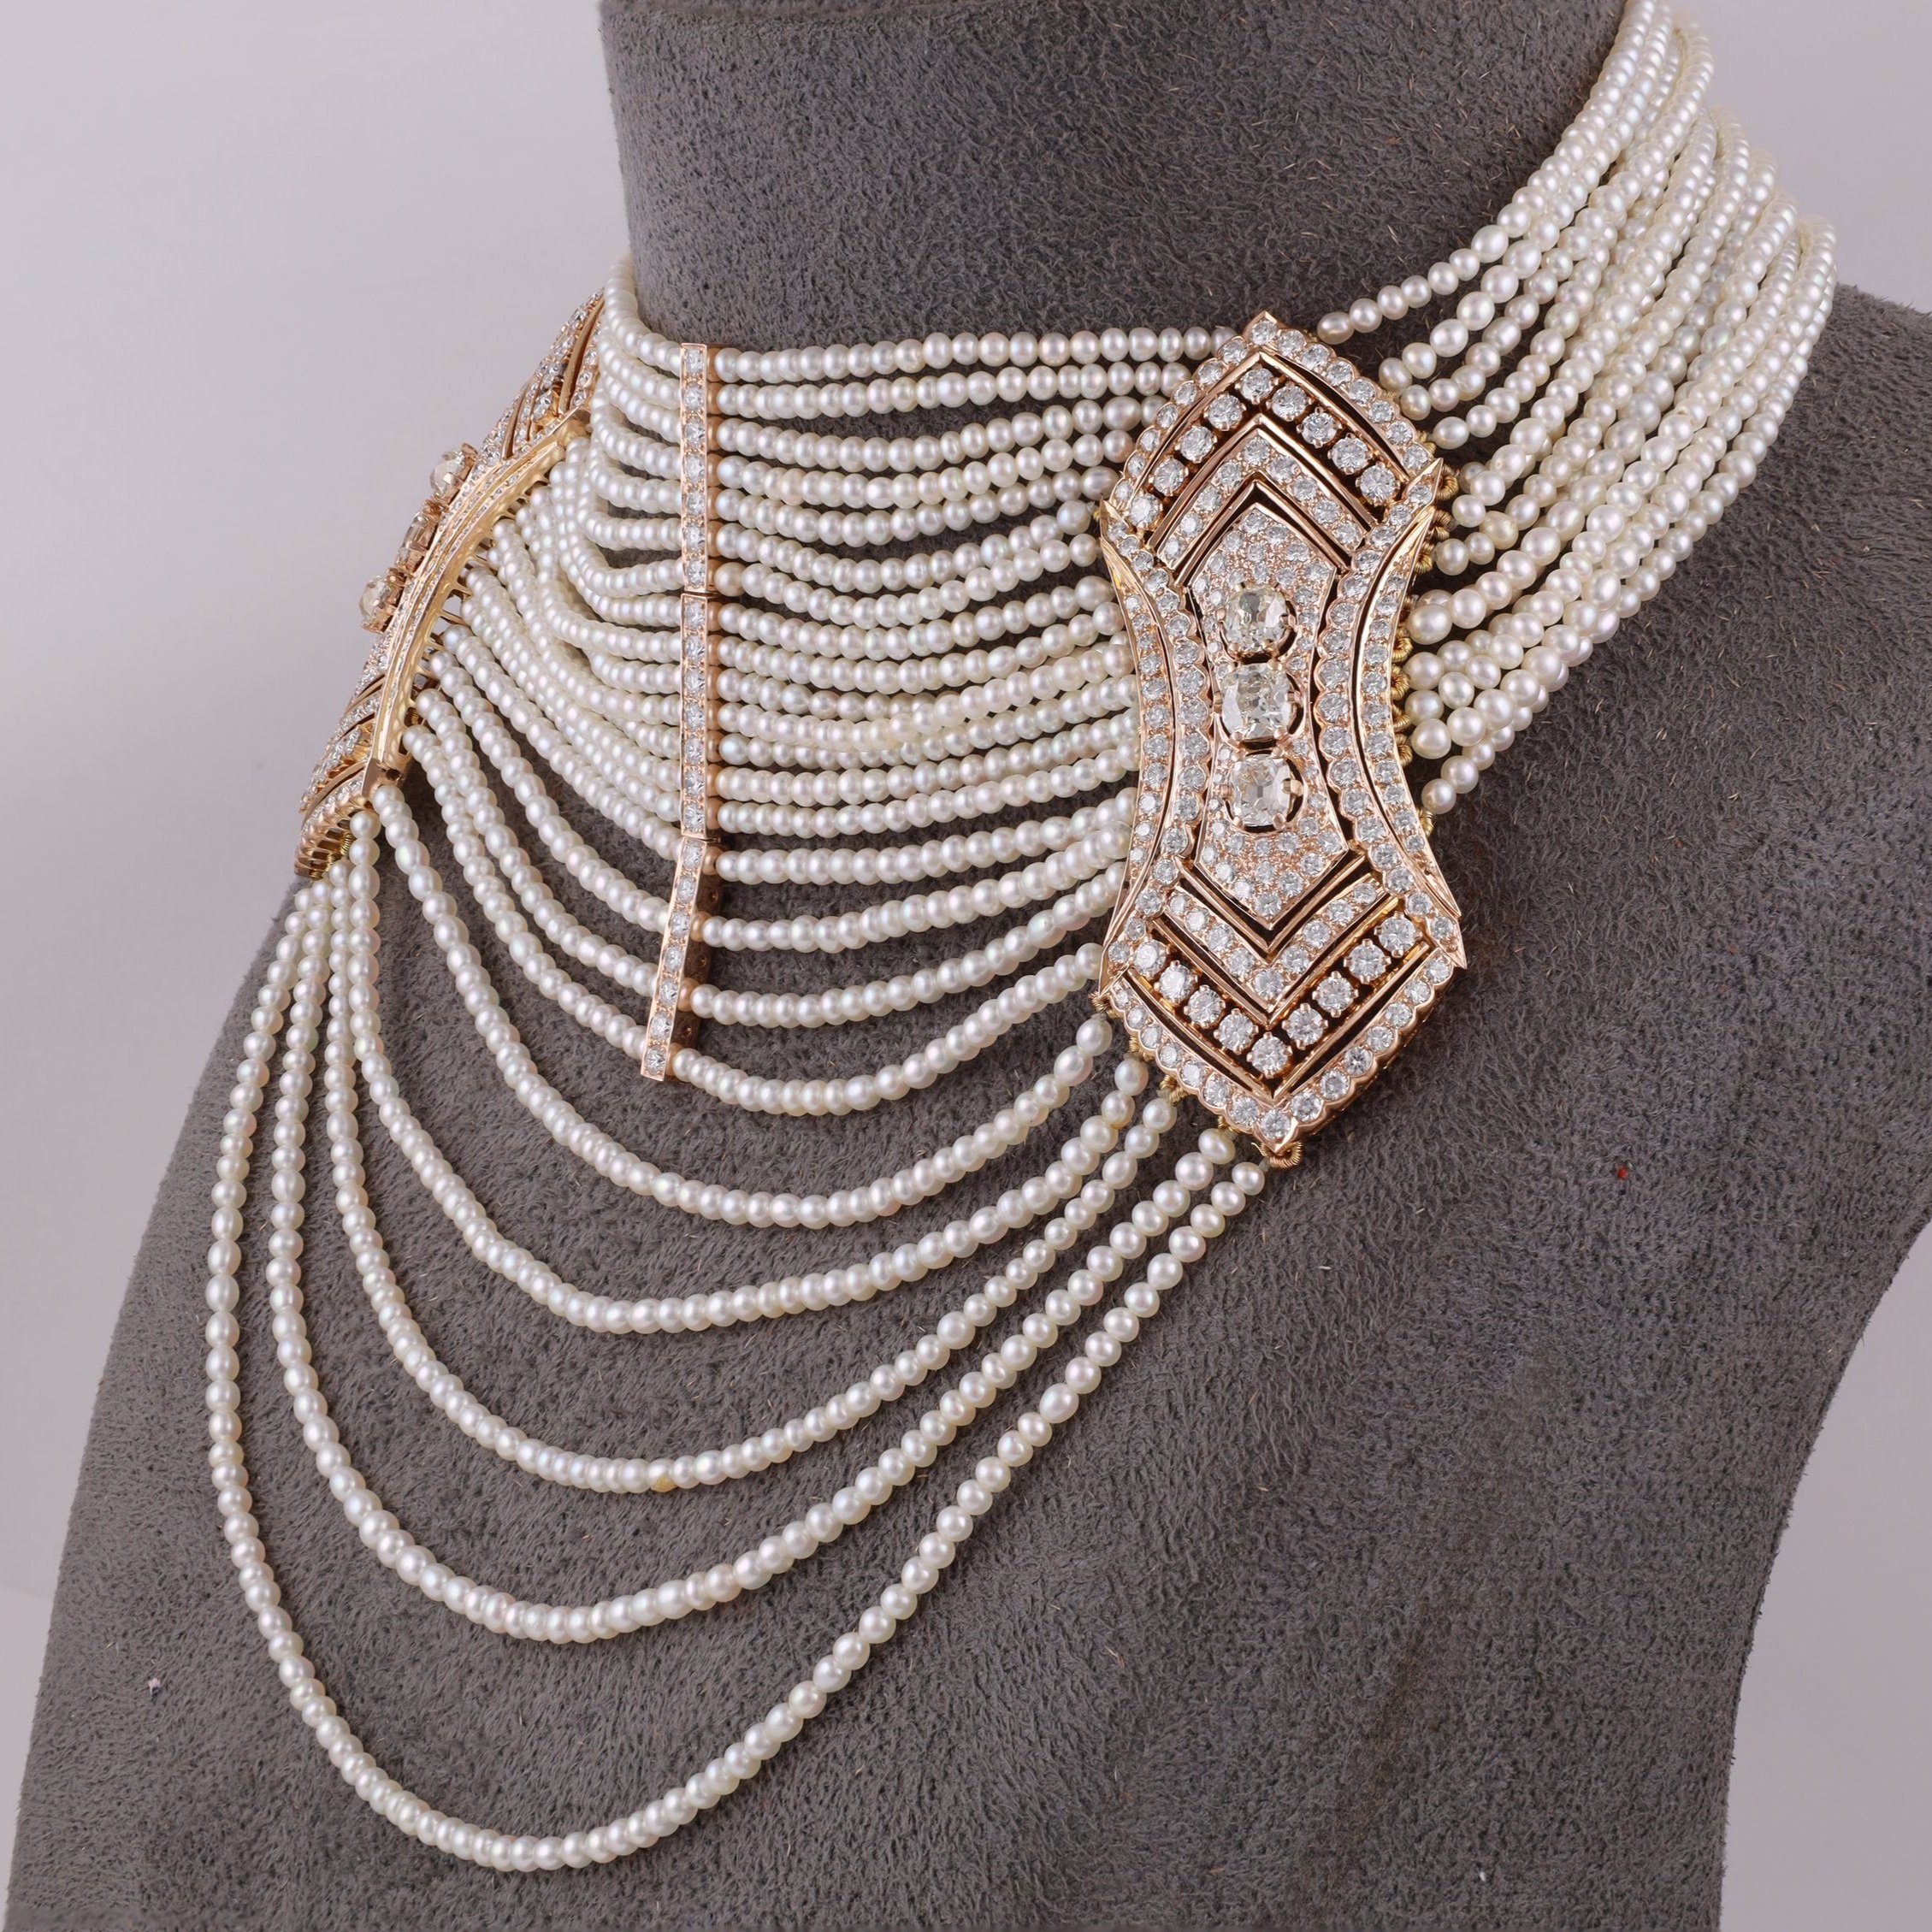 The first piece of jewelry Ananya fell in love with: her grandmom’s necklace, featuring Basra pearls and old cut diamonds